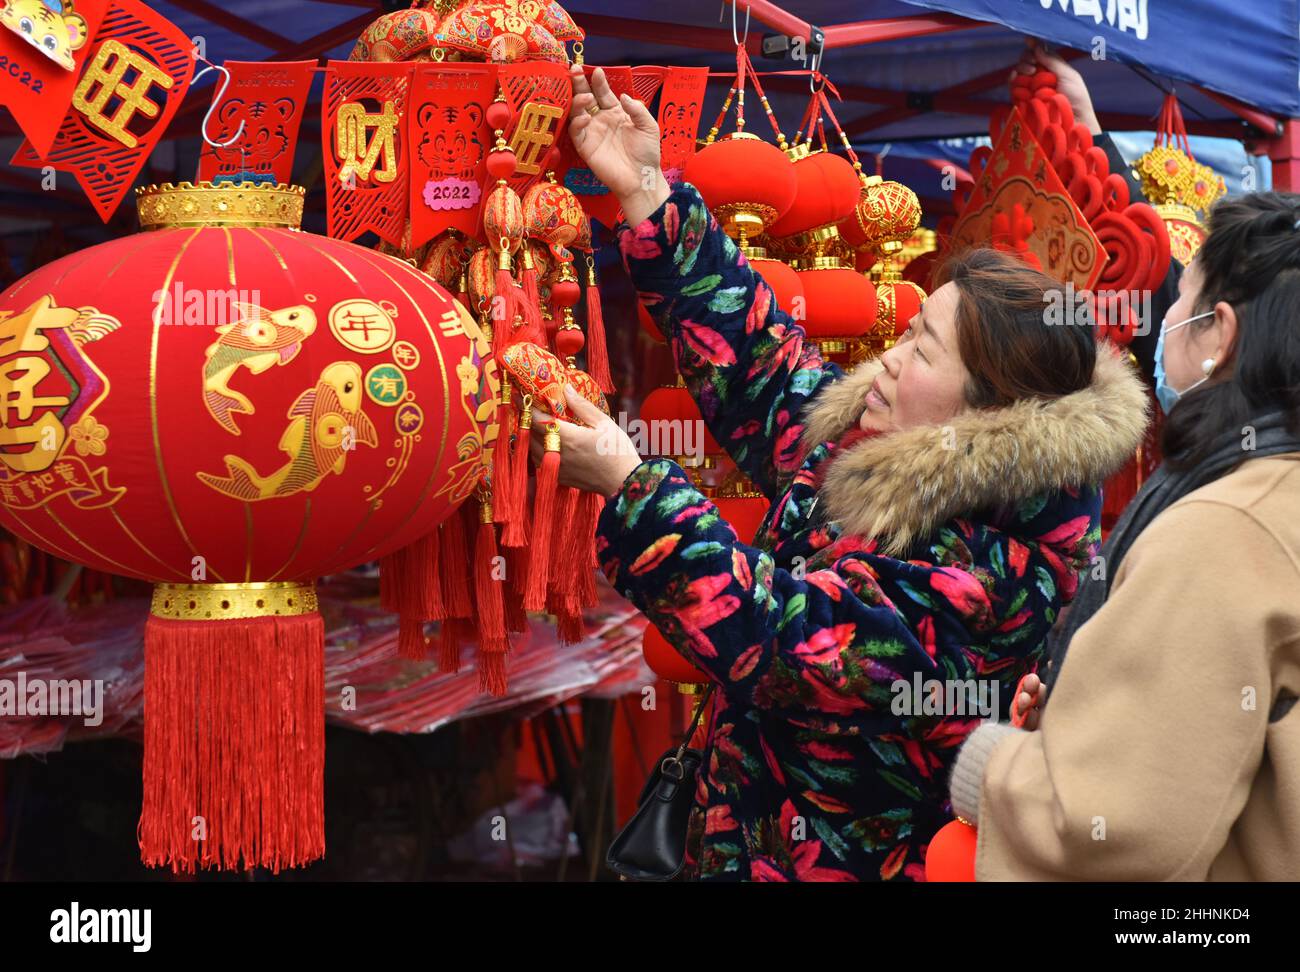 Buyee Chinese New Year Festival 2022 ! Early spring shopping festival !! -  Buyee